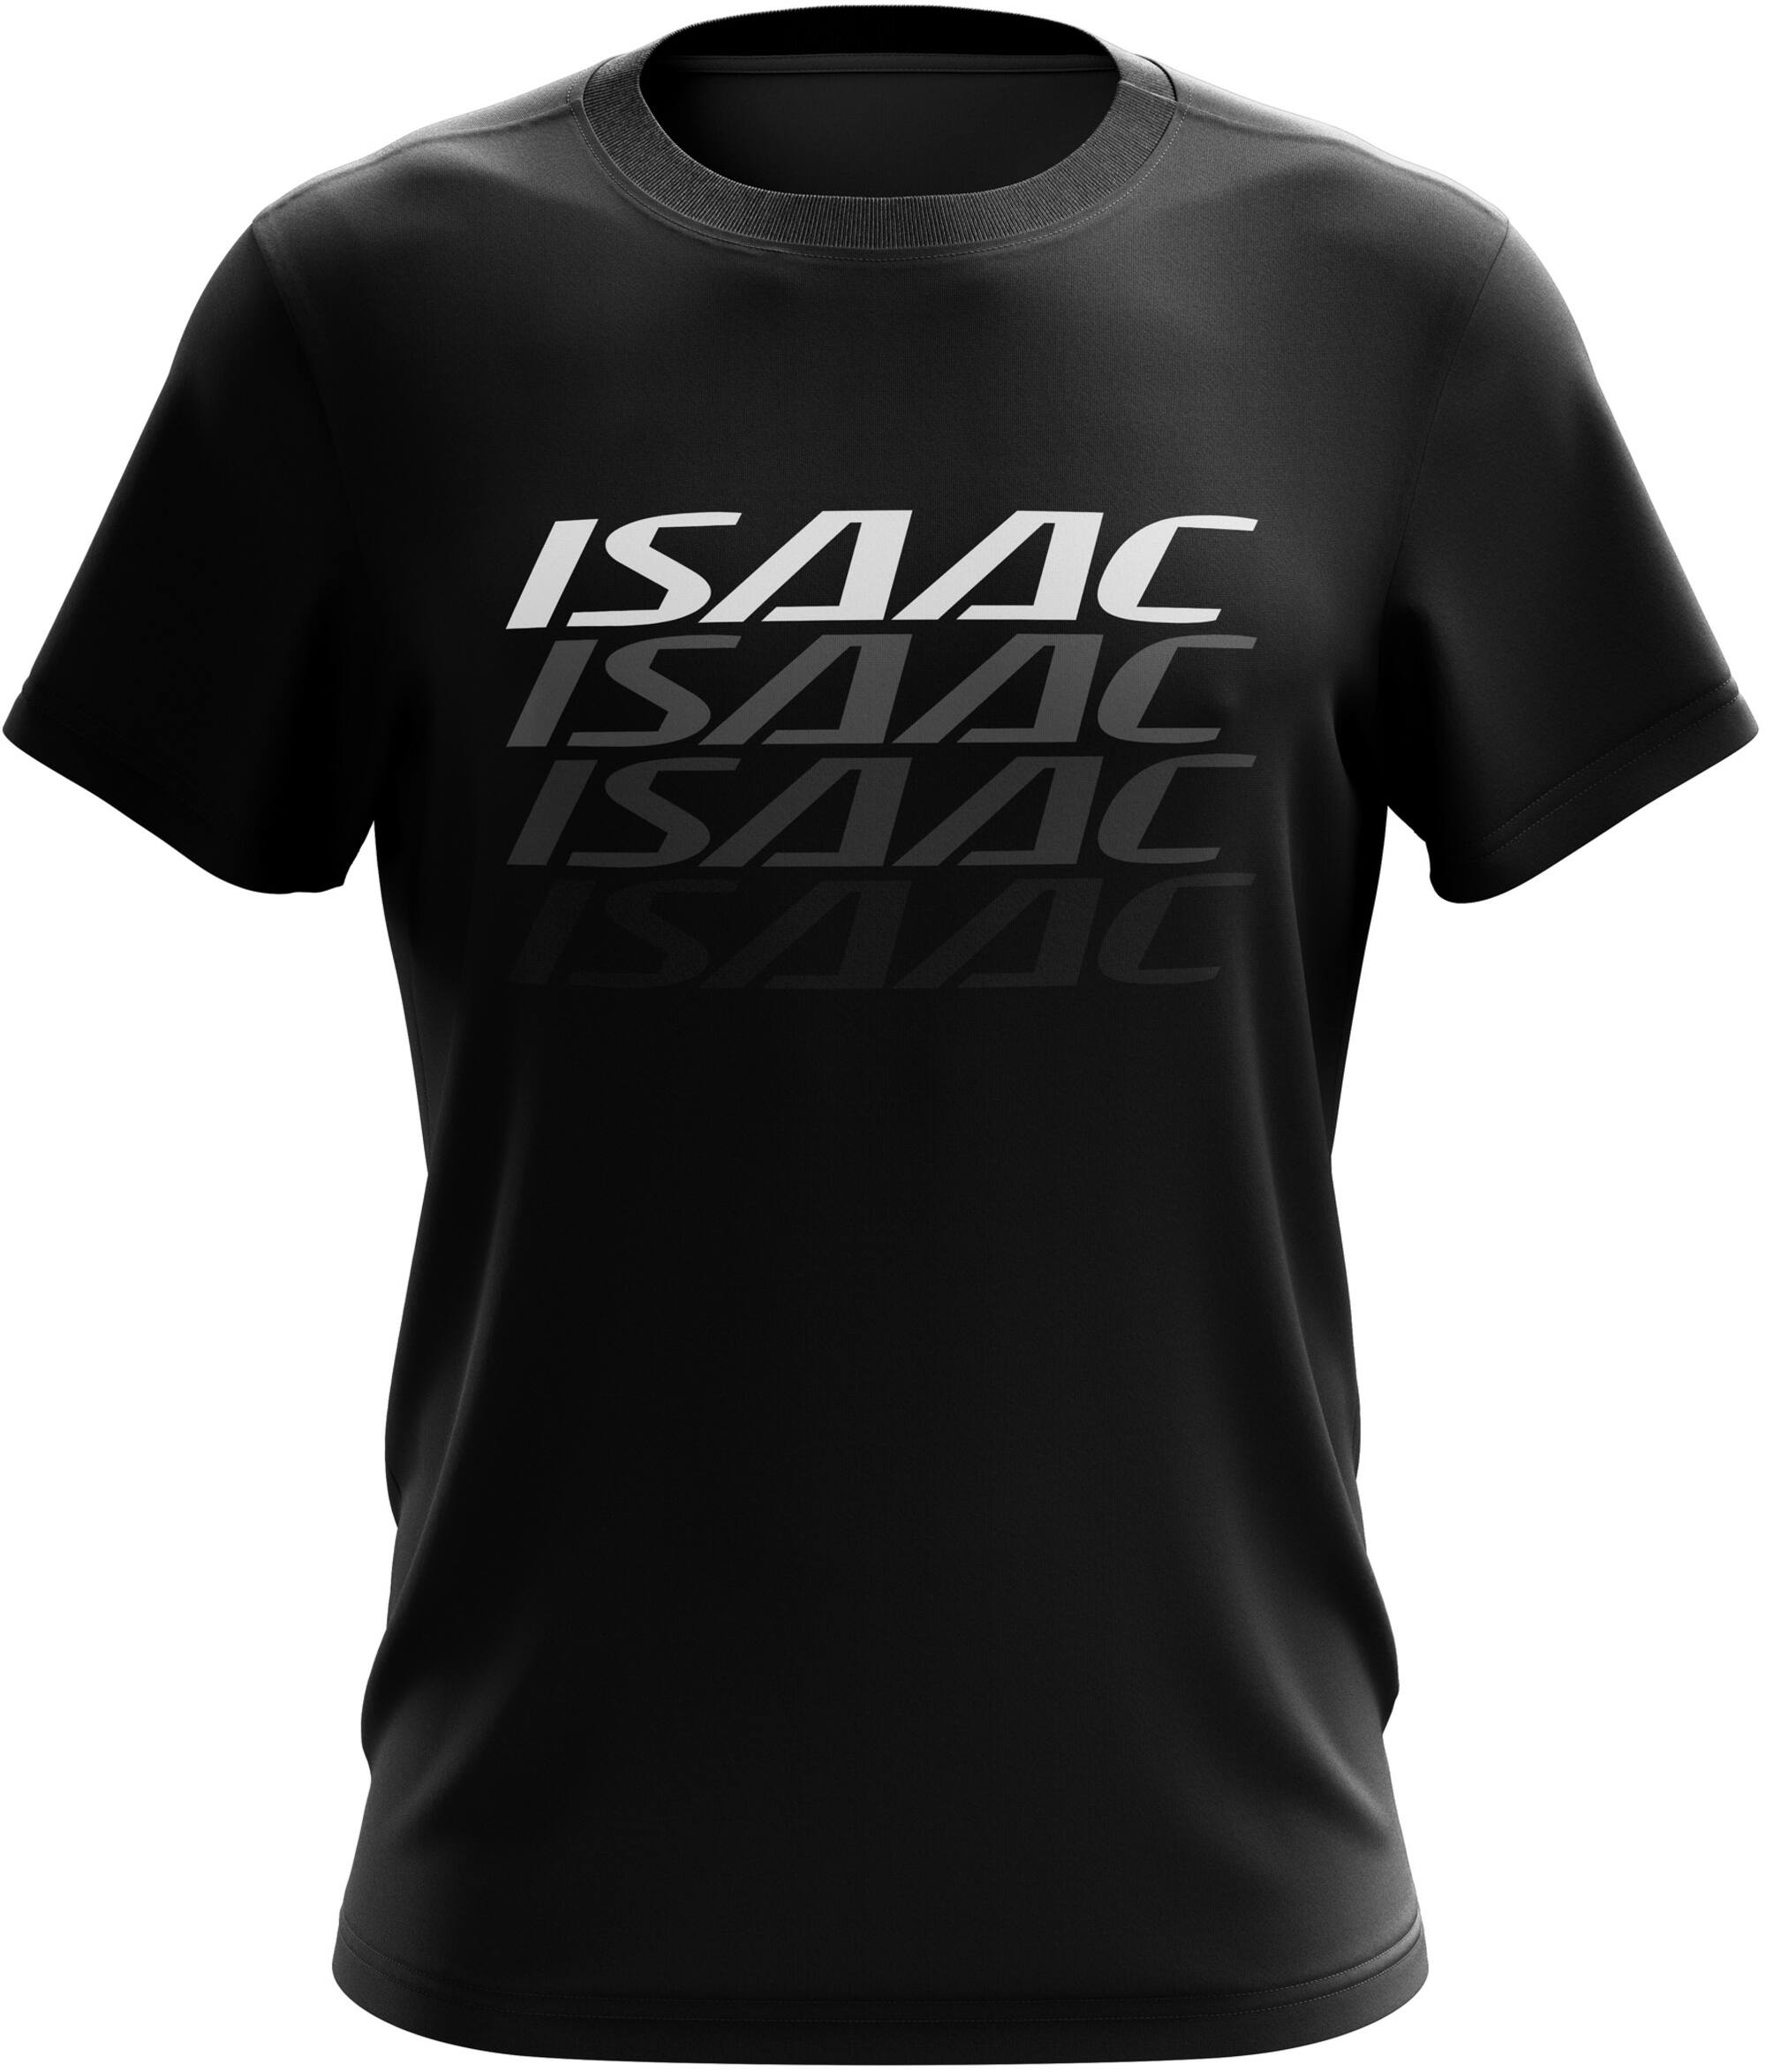 ISAAC T-SHIRT CASUAL SIZE L